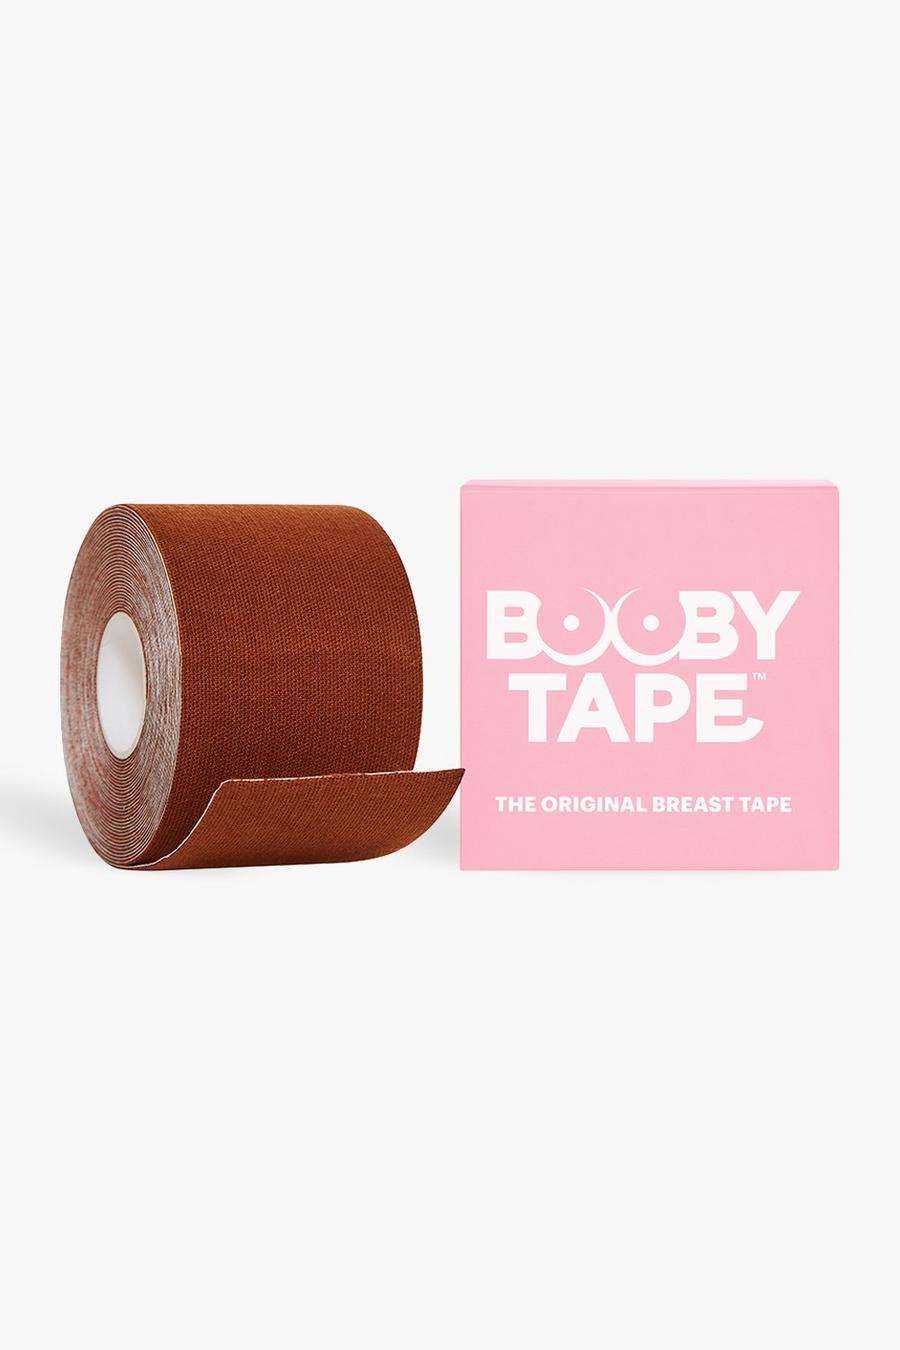 Booby Tape Brown 5M Roll image number 1